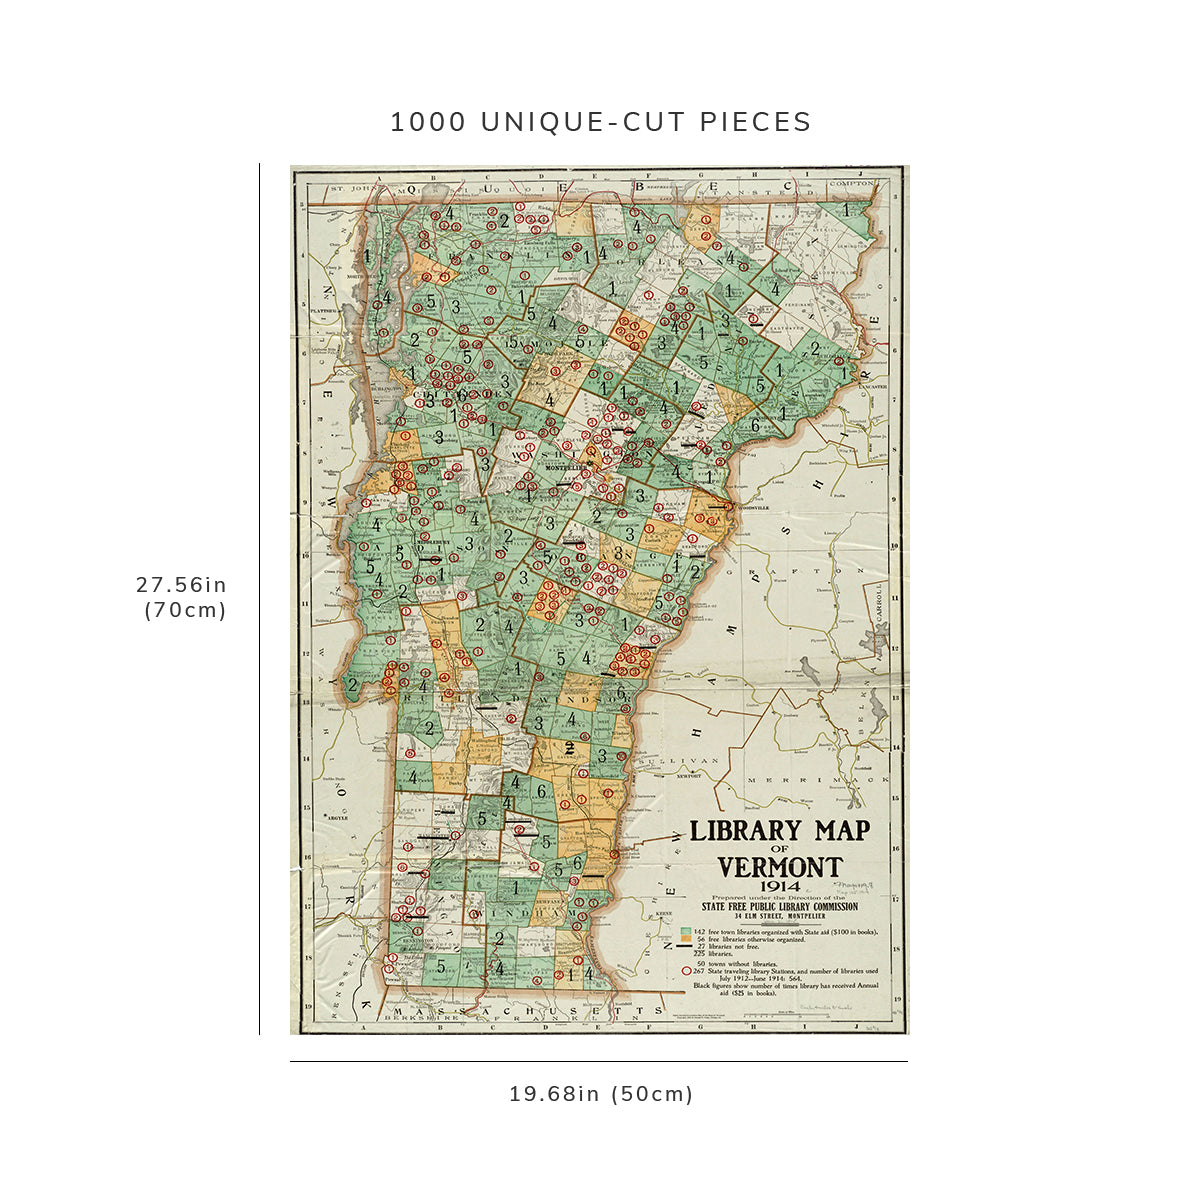 1000 Piece Jigsaw Puzzle: 1914 Map of Vermont Library of Vermont